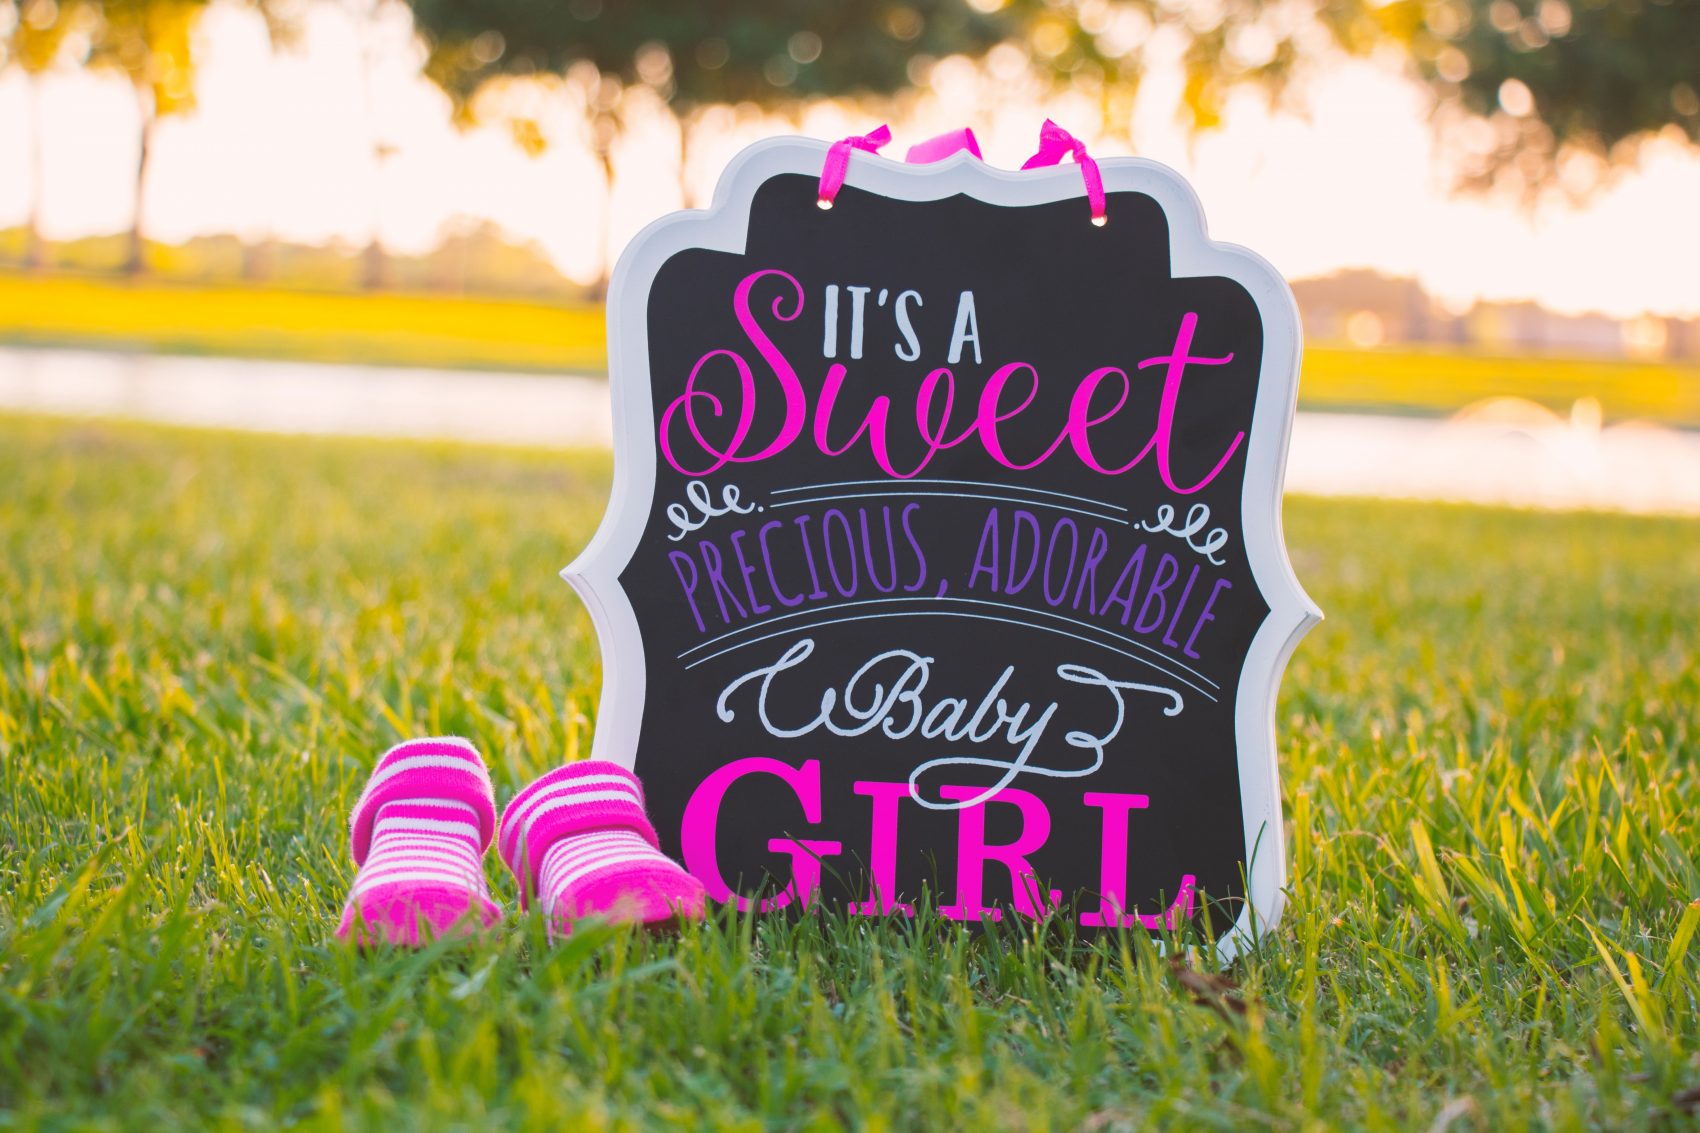 Is It A Boy? Girl? Time To Stop Asking? The Gender Reveal Party Reconsidered